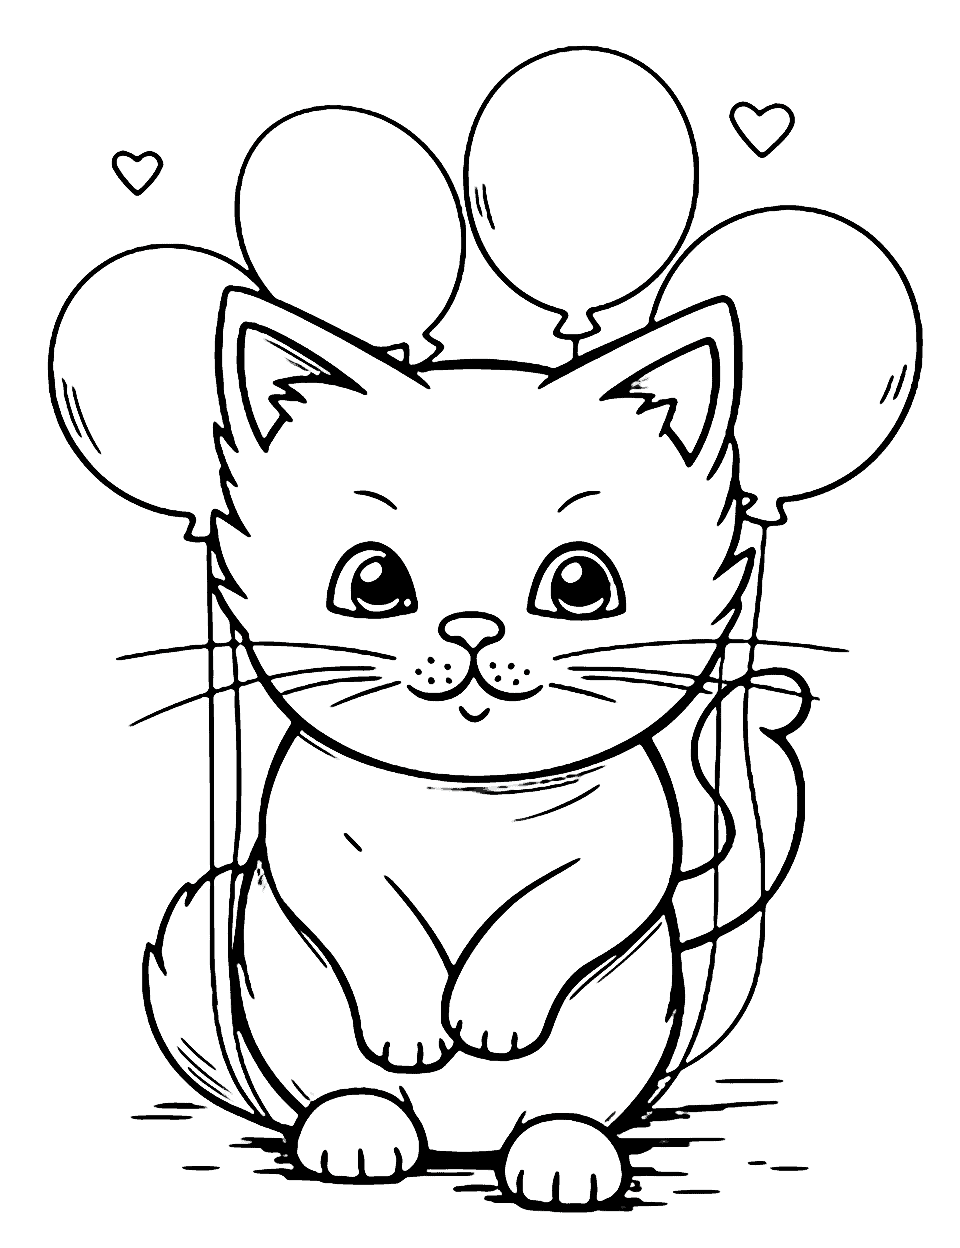 Cat With Balloons Coloring Page - A coloring page of a cat floating away with a bunch of colorful balloons.